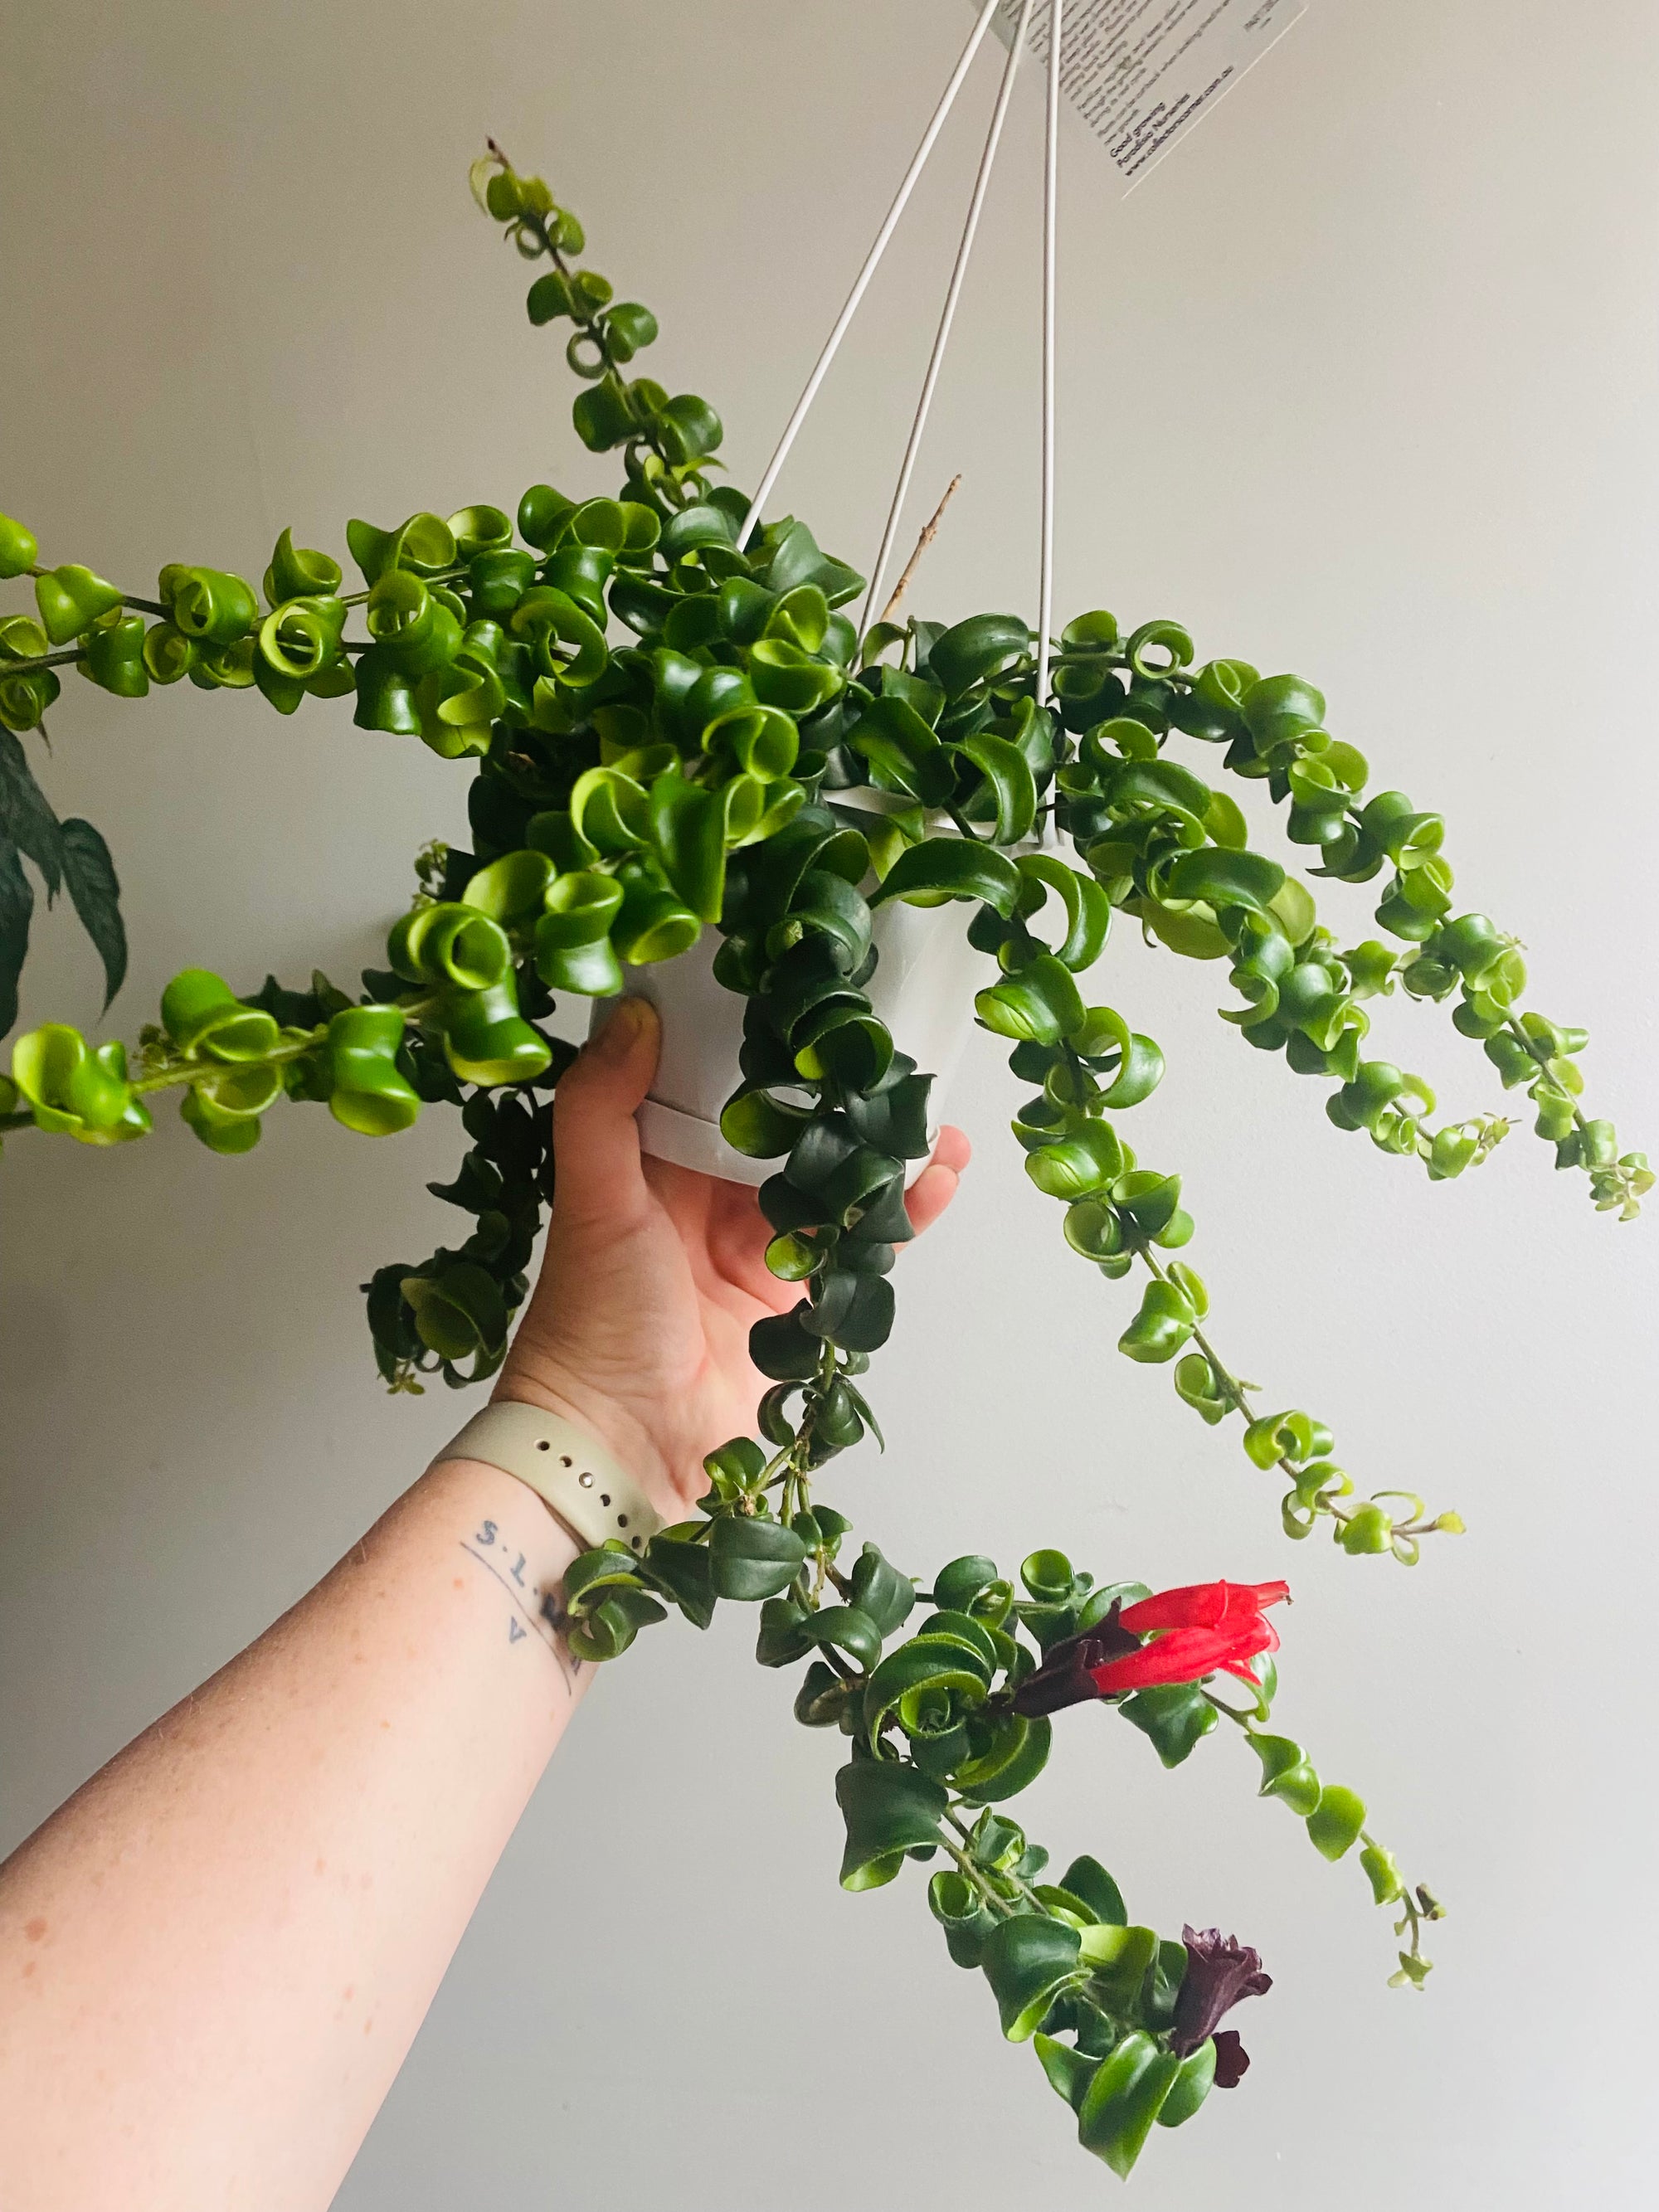 Curly Lipstick Plant (Curly) - Aeschynanthus radicans